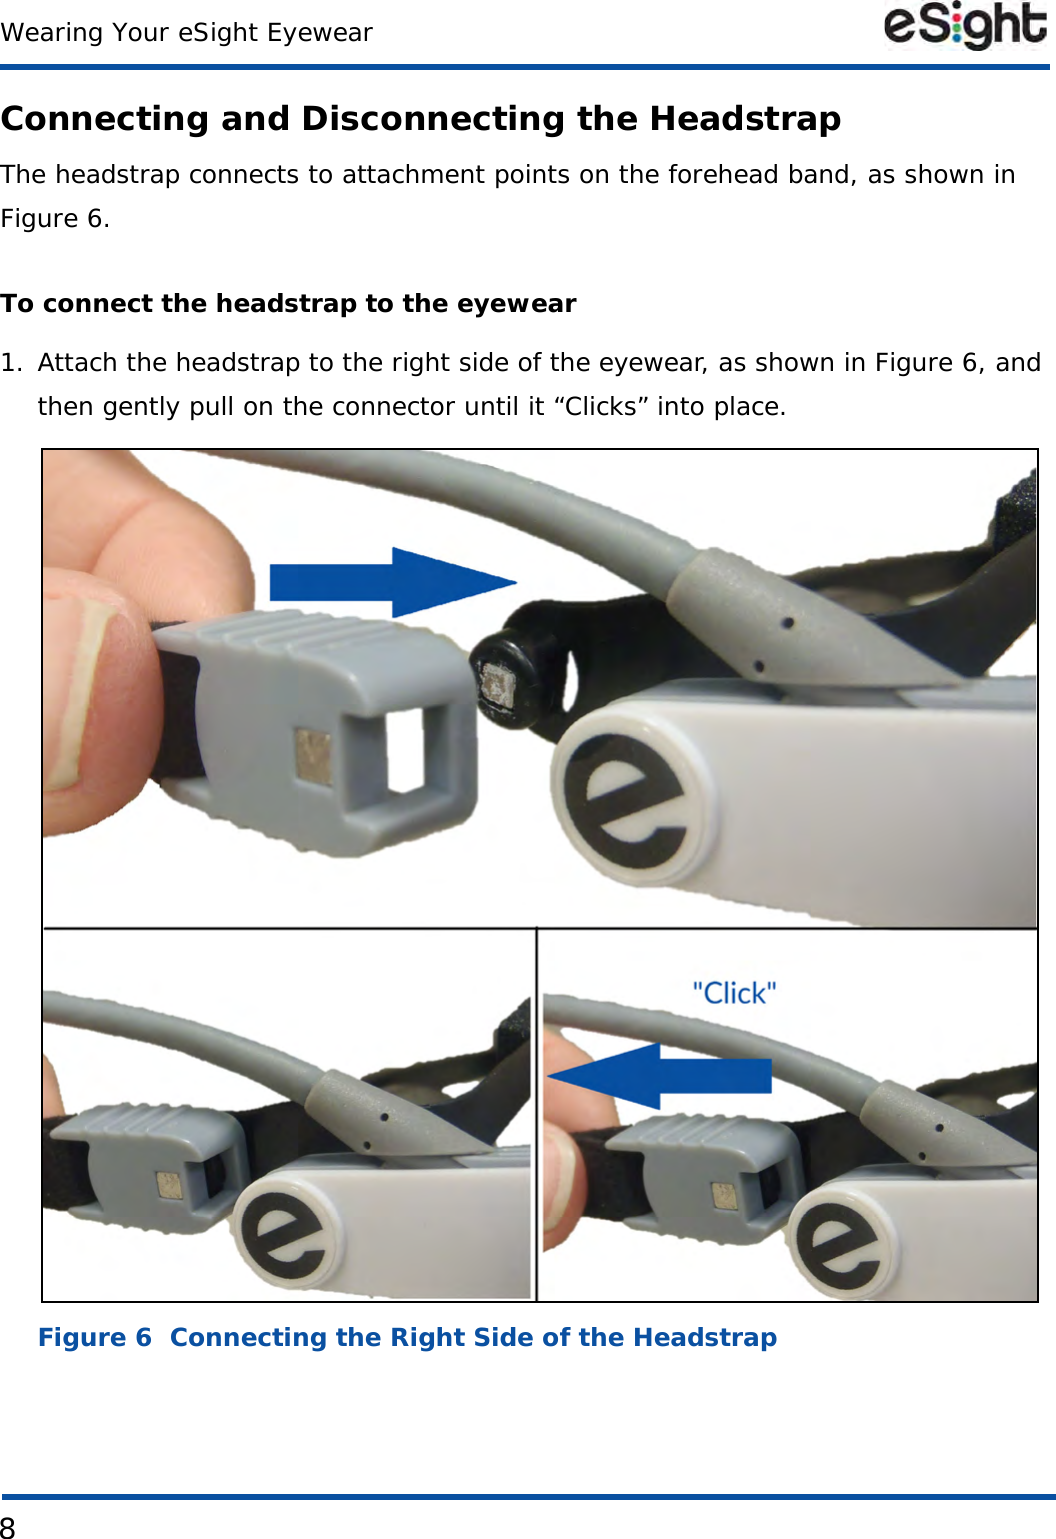 8Wearing Your eSight EyewearConnecting and Disconnecting the HeadstrapThe headstrap connects to attachment points on the forehead band, as shown in Figure 6.To connect the headstrap to the eyewear1. Attach the headstrap to the right side of the eyewear, as shown in Figure 6, and then gently pull on the connector until it “Clicks” into place. Figure 6  Connecting the Right Side of the Headstrap